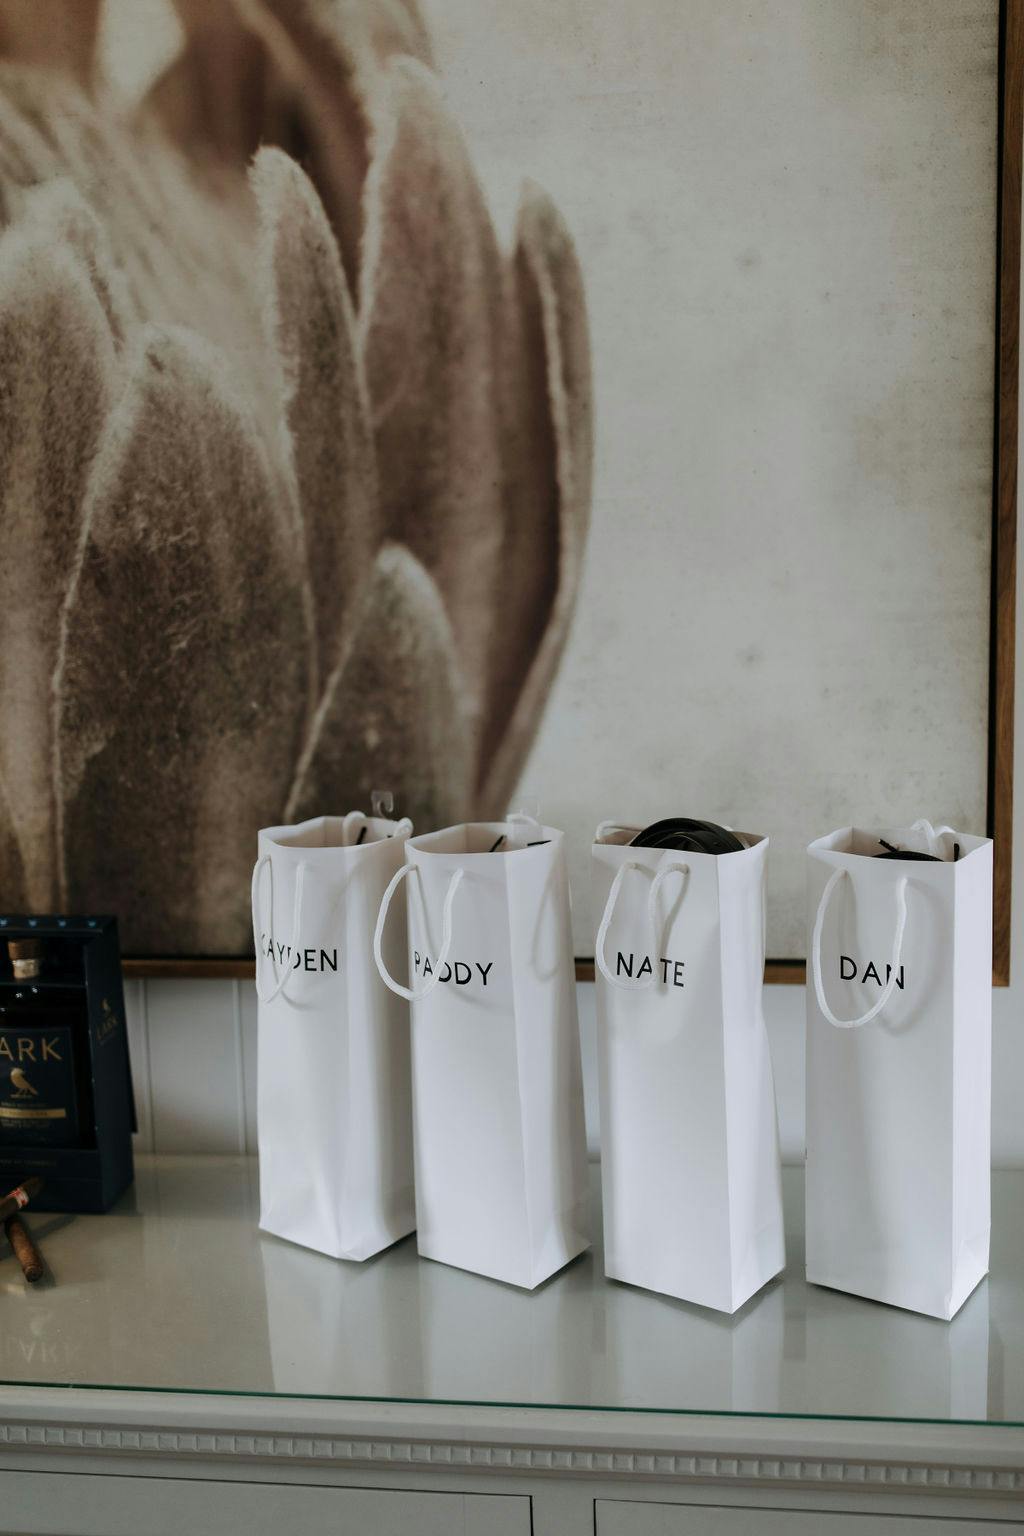 Four white gift bags with names (Jayden, Paddy, Nate, Dan) written on them are lined up on a glass table. A large, framed artwork with soft, neutral colors hangs on the wall behind the bags. A black box is partially visible on the left side of the table.